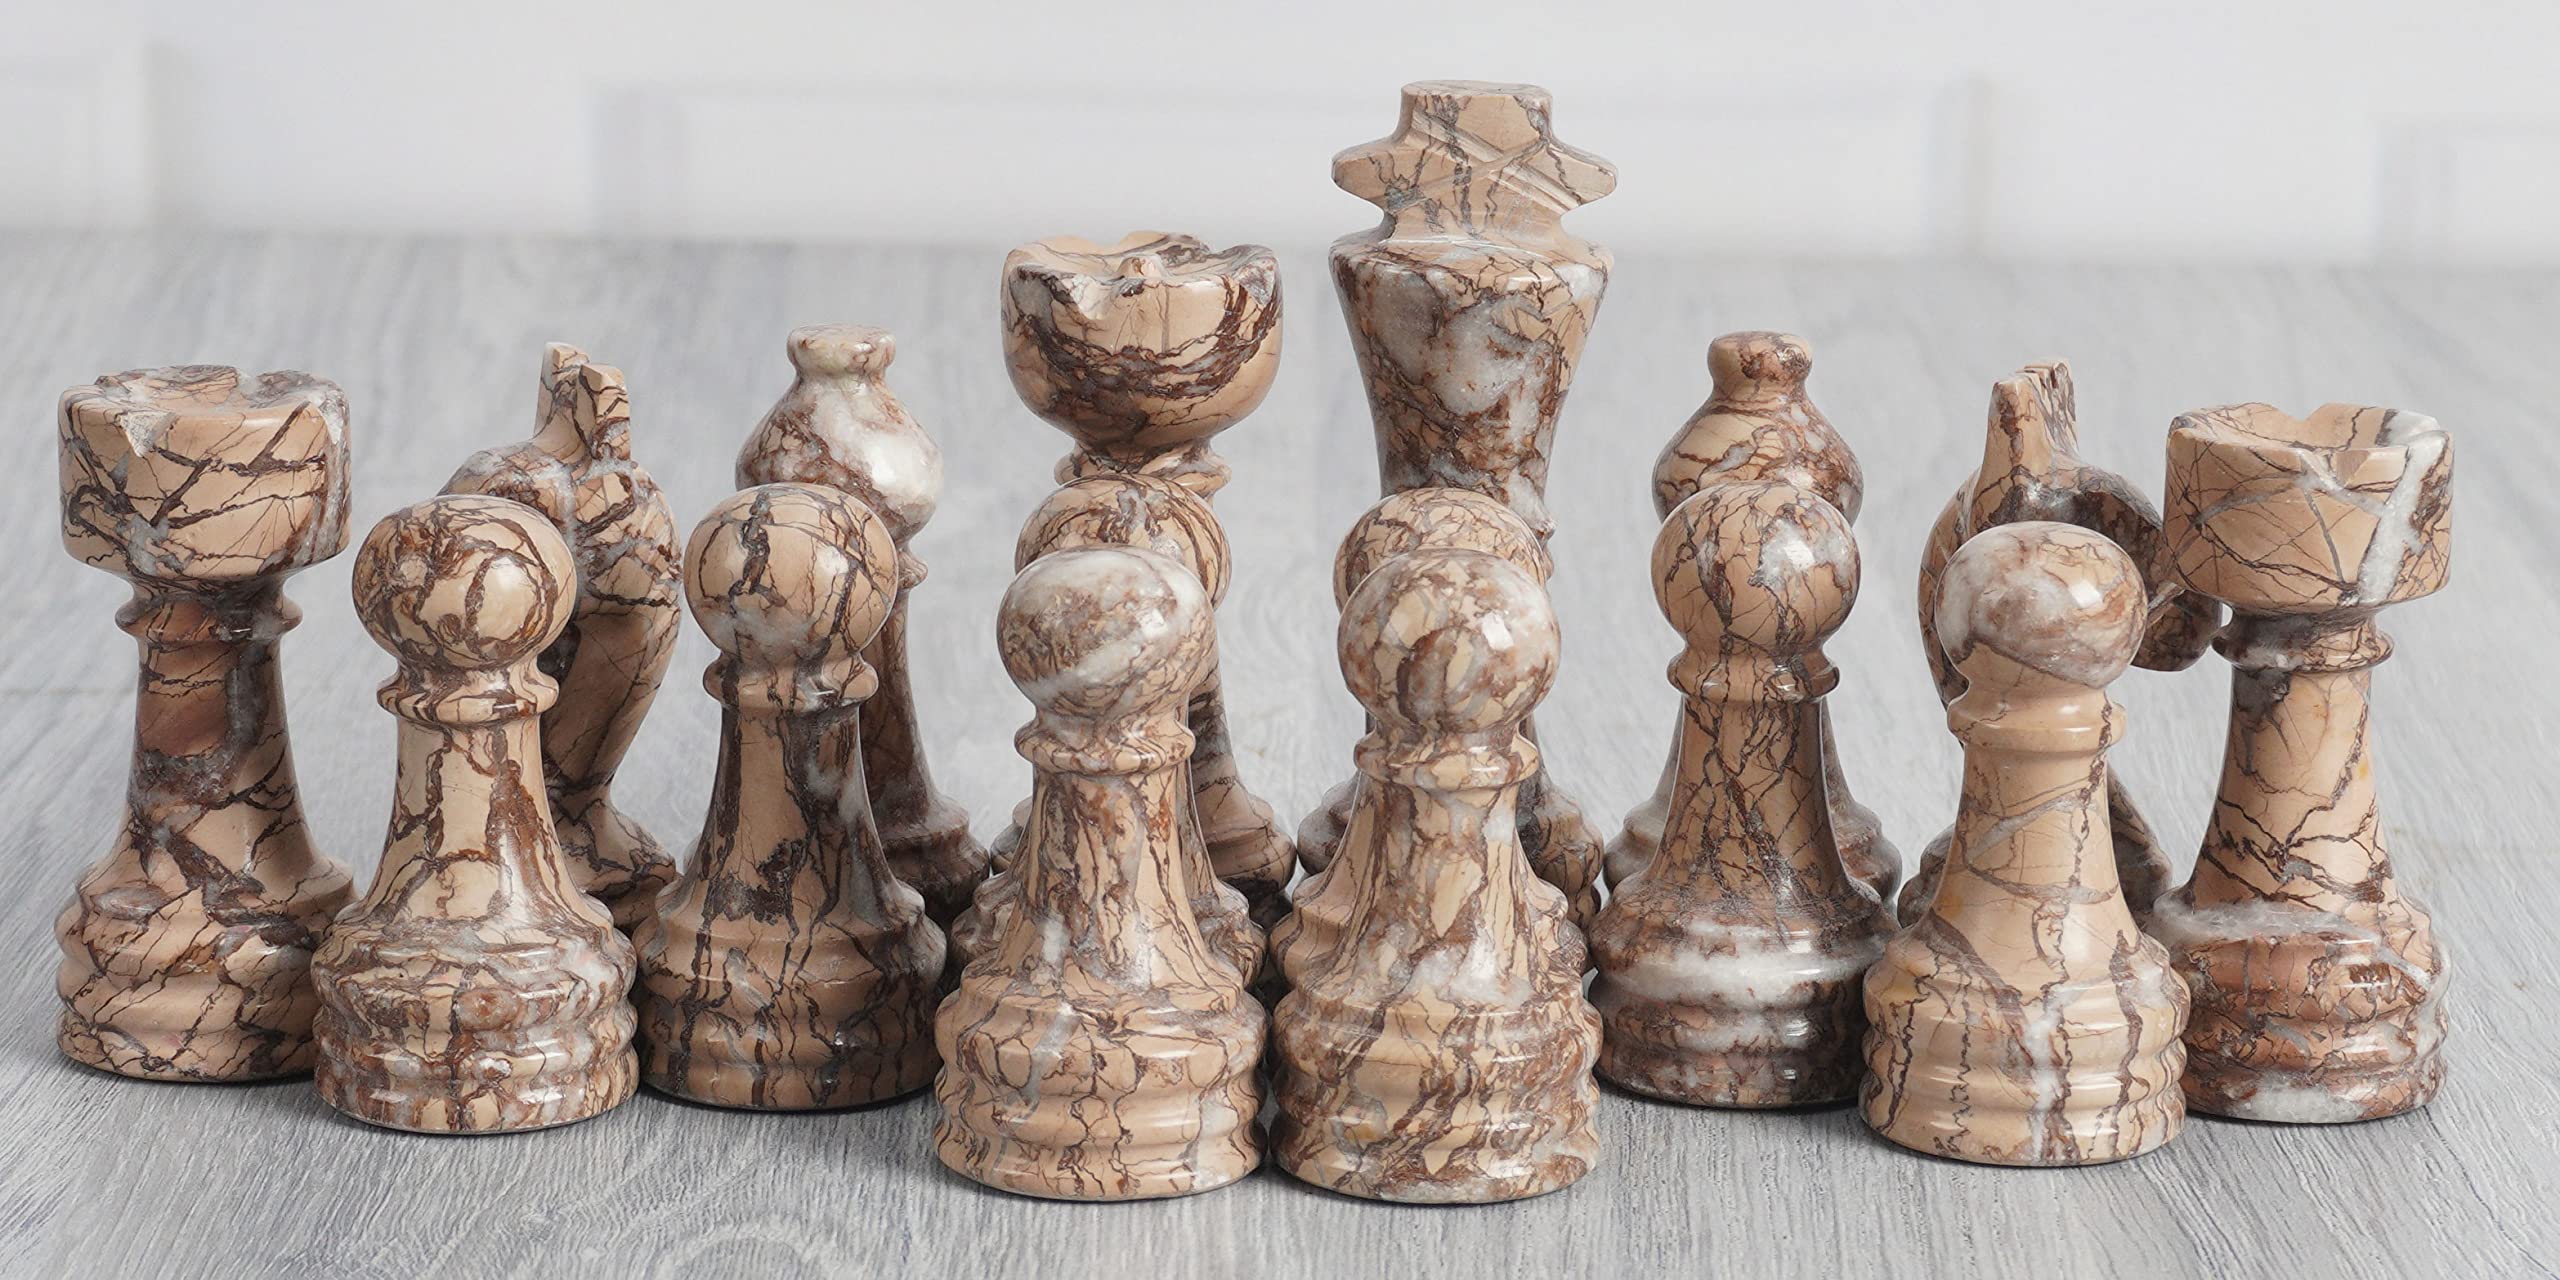 RADICALn Marble Big Board Games Complete Black and Marinara Chess Figures - Suitable for 16-20 Inches Chess Board - Antique 32 Chess Figures Set - Completely Marble Handmade Non-Wooden Chess Pieces